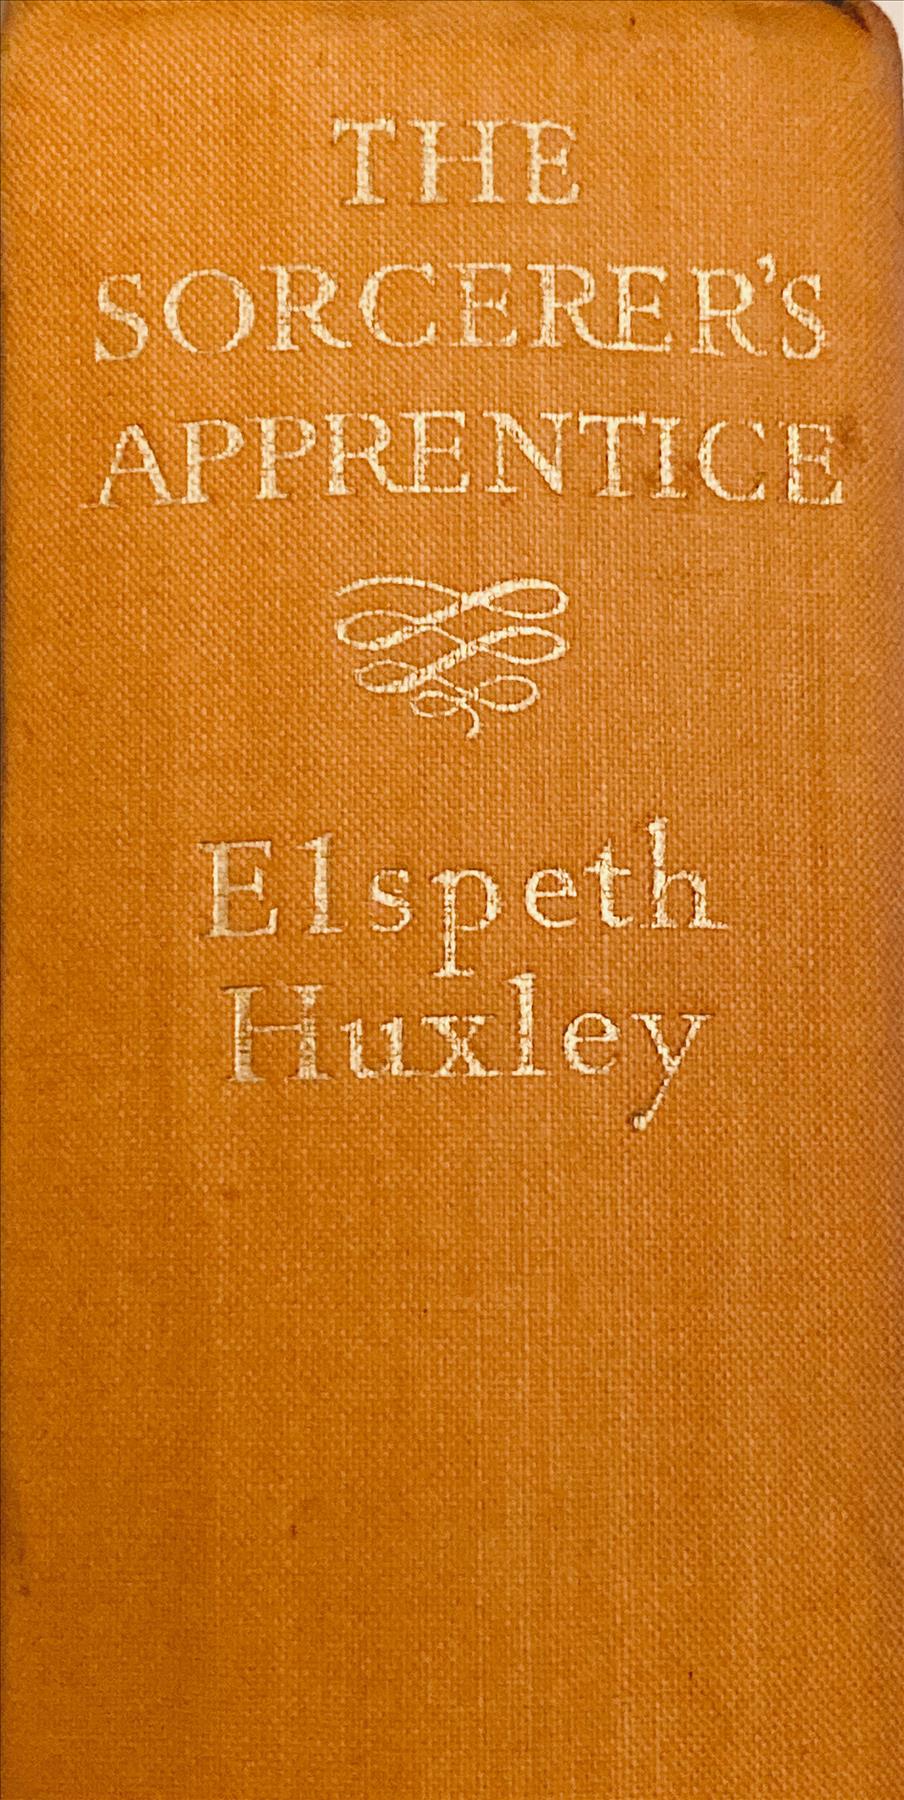 The Sorcerer’s Apprentice: A Journey through East Africa by  Elspeth Huxley (1948)